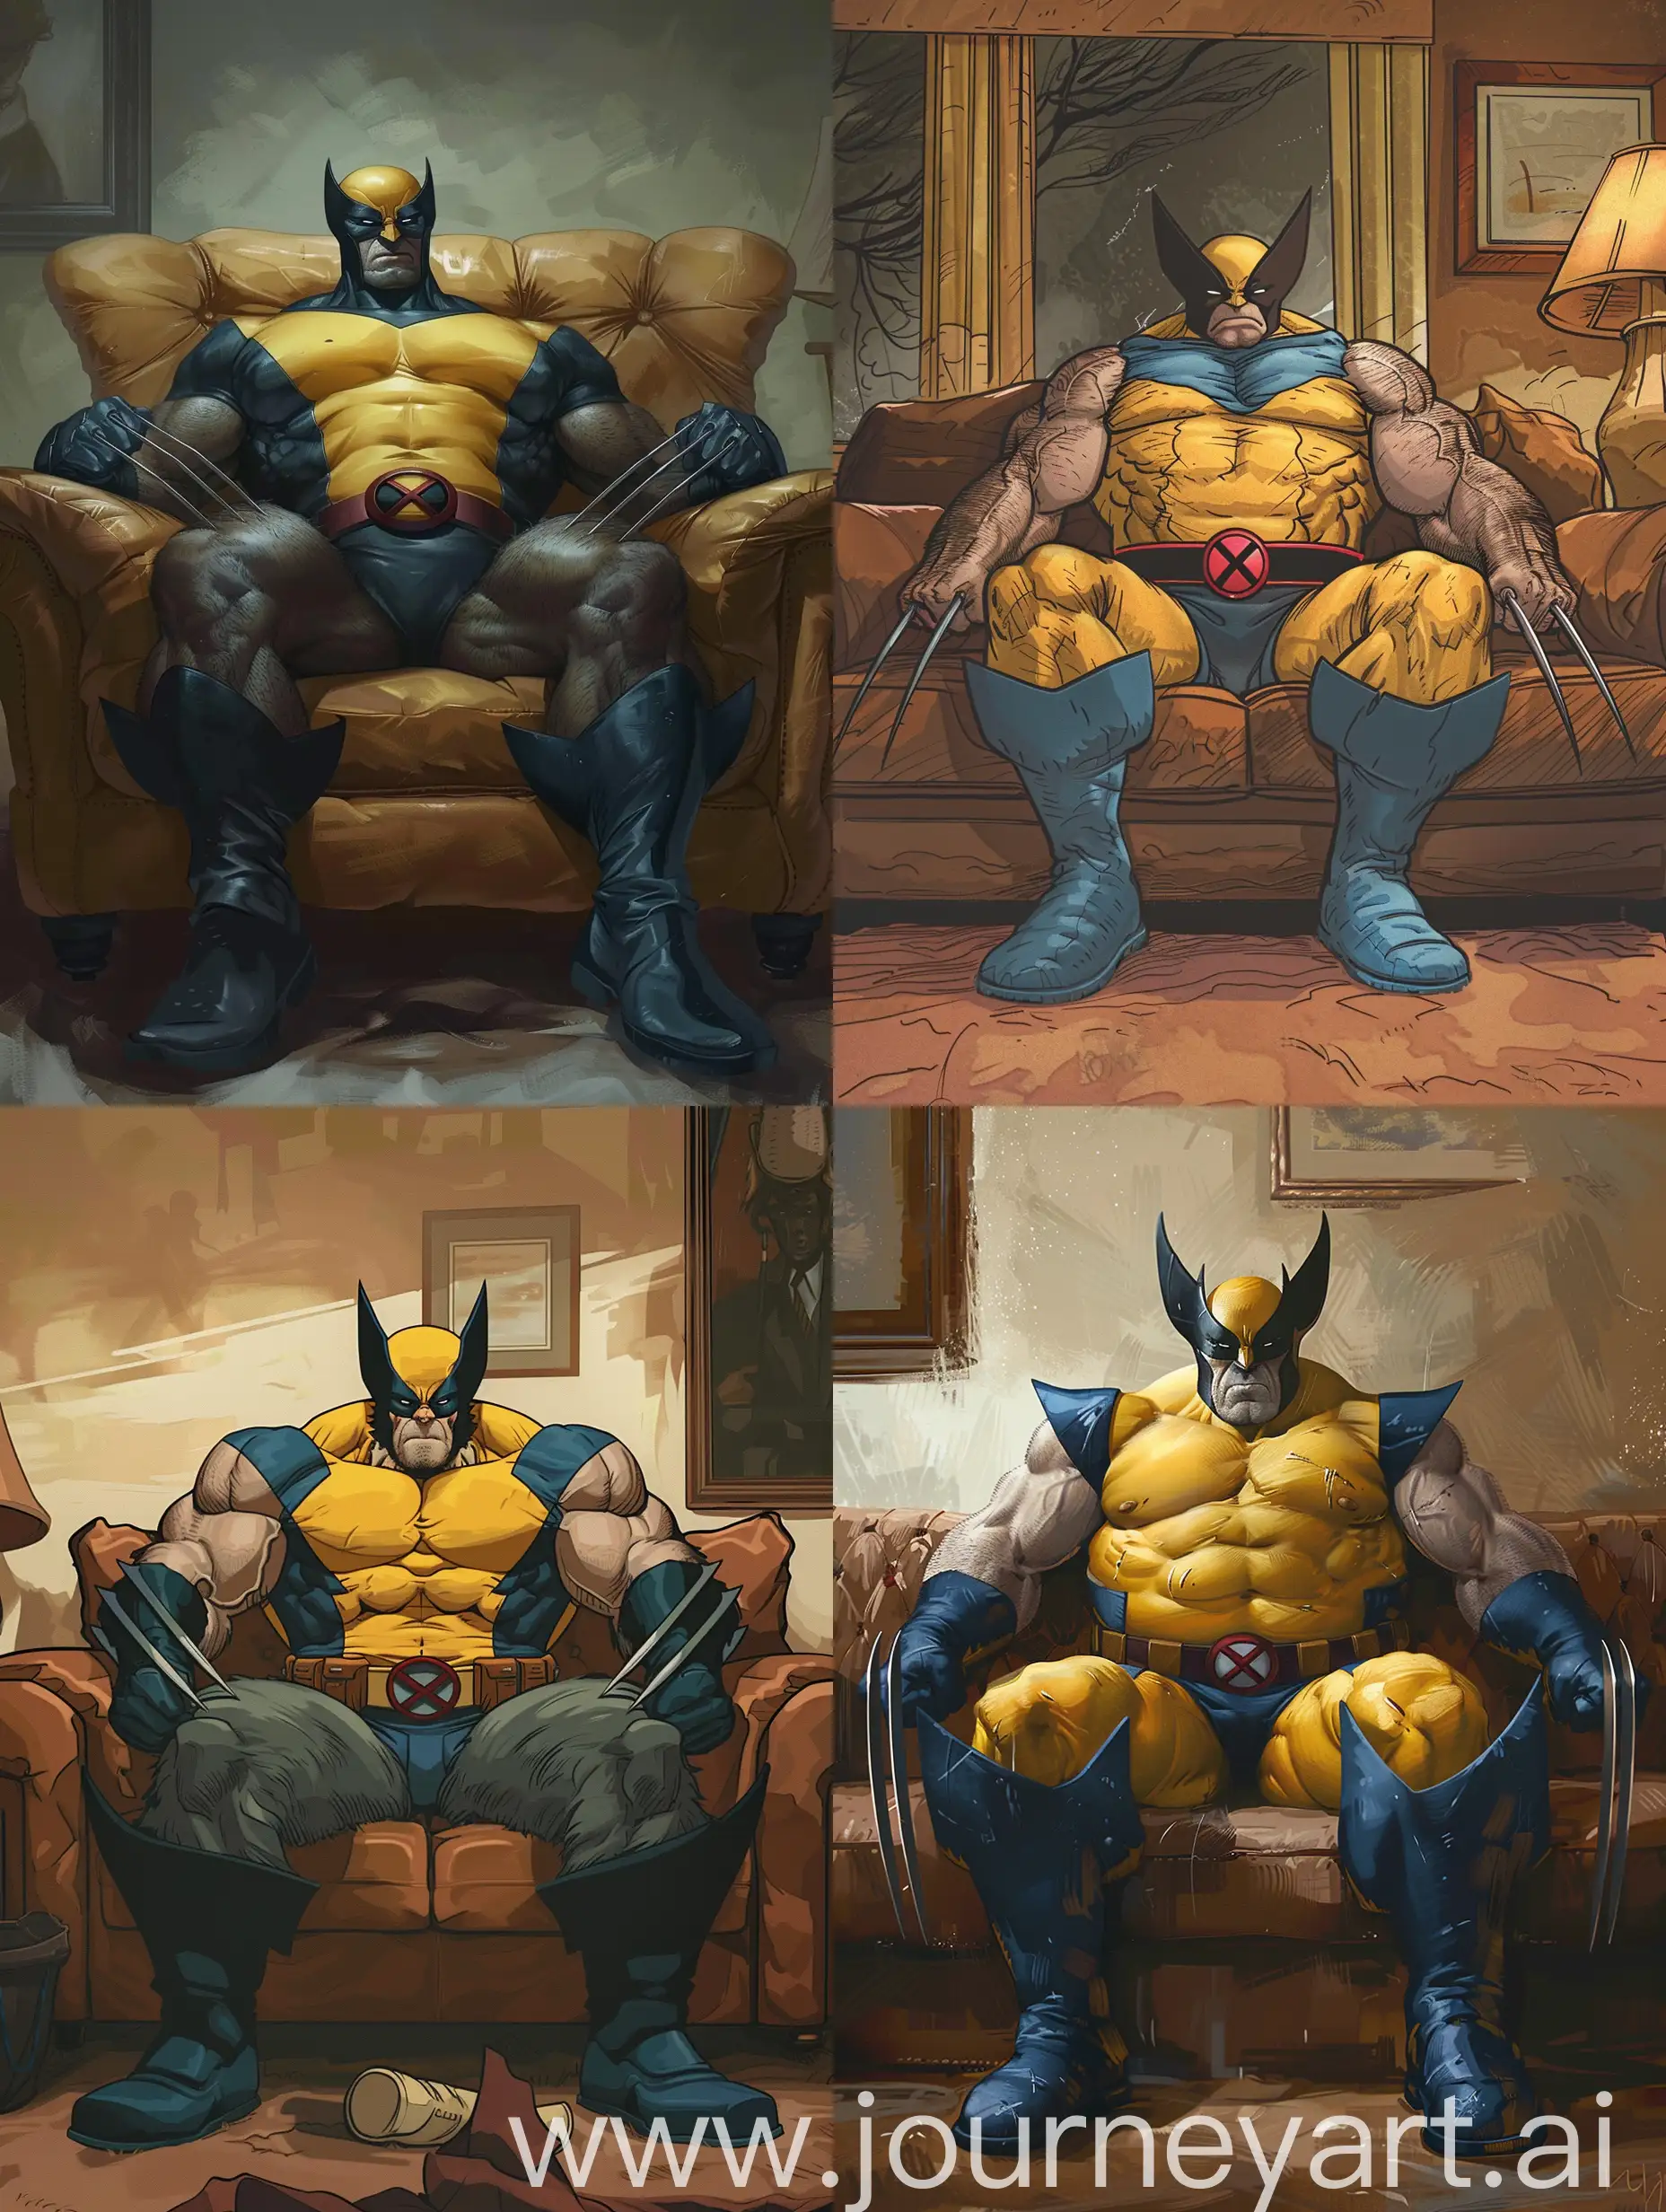 Fat Wolverine is sitting on the couch